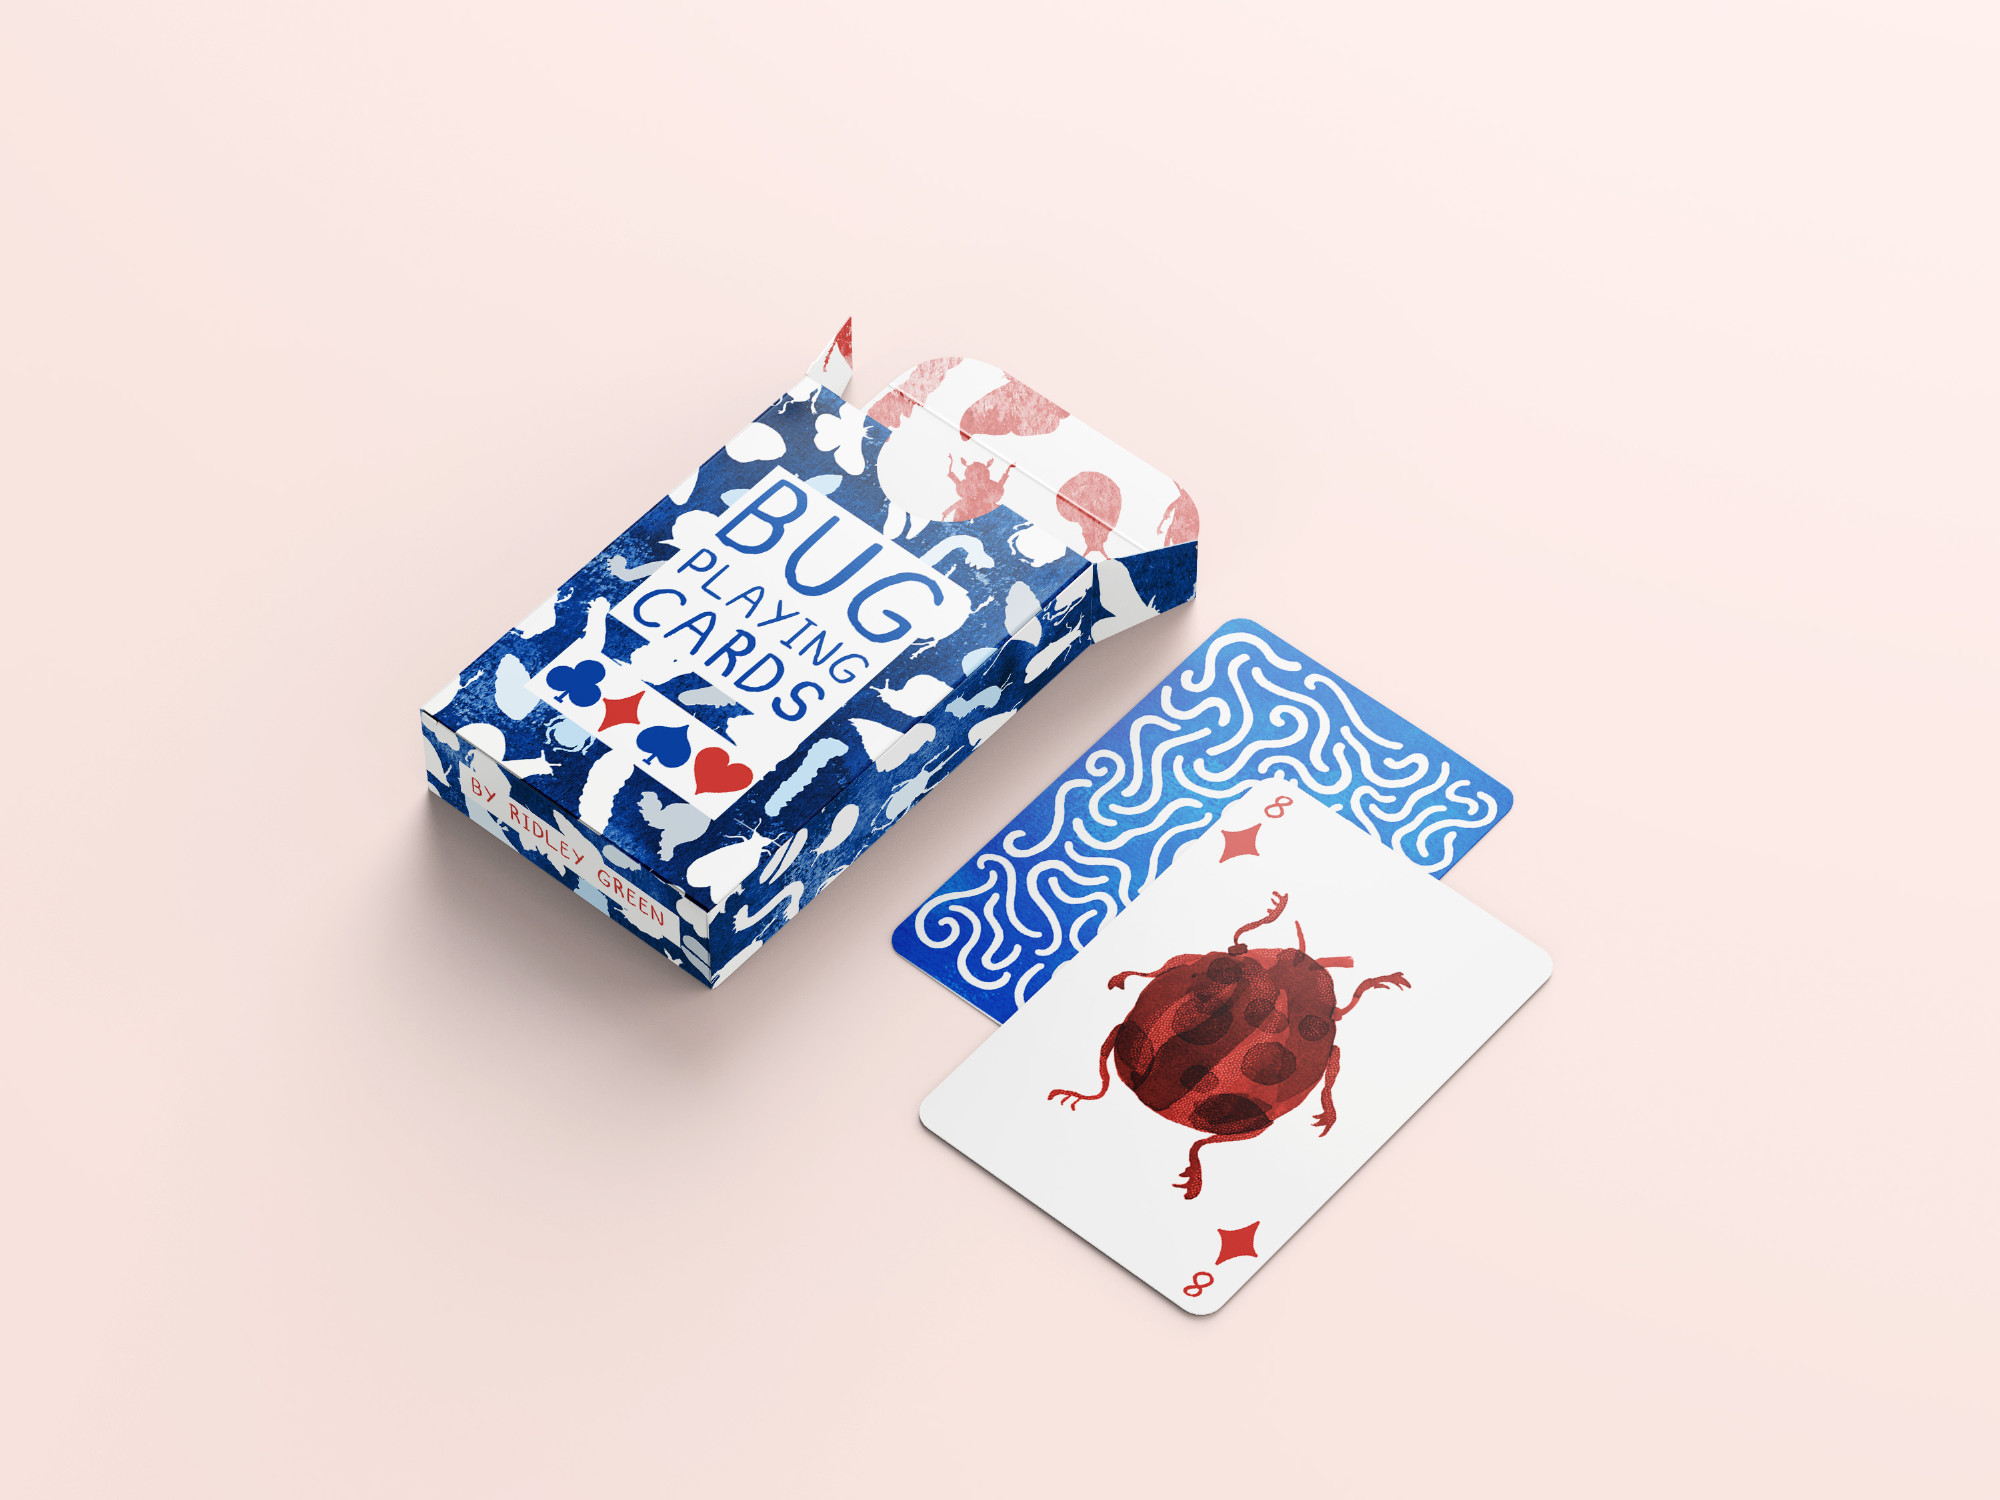 Bug Playing Cards. Set of bug themed playing cards I designed as a part of my final projects.